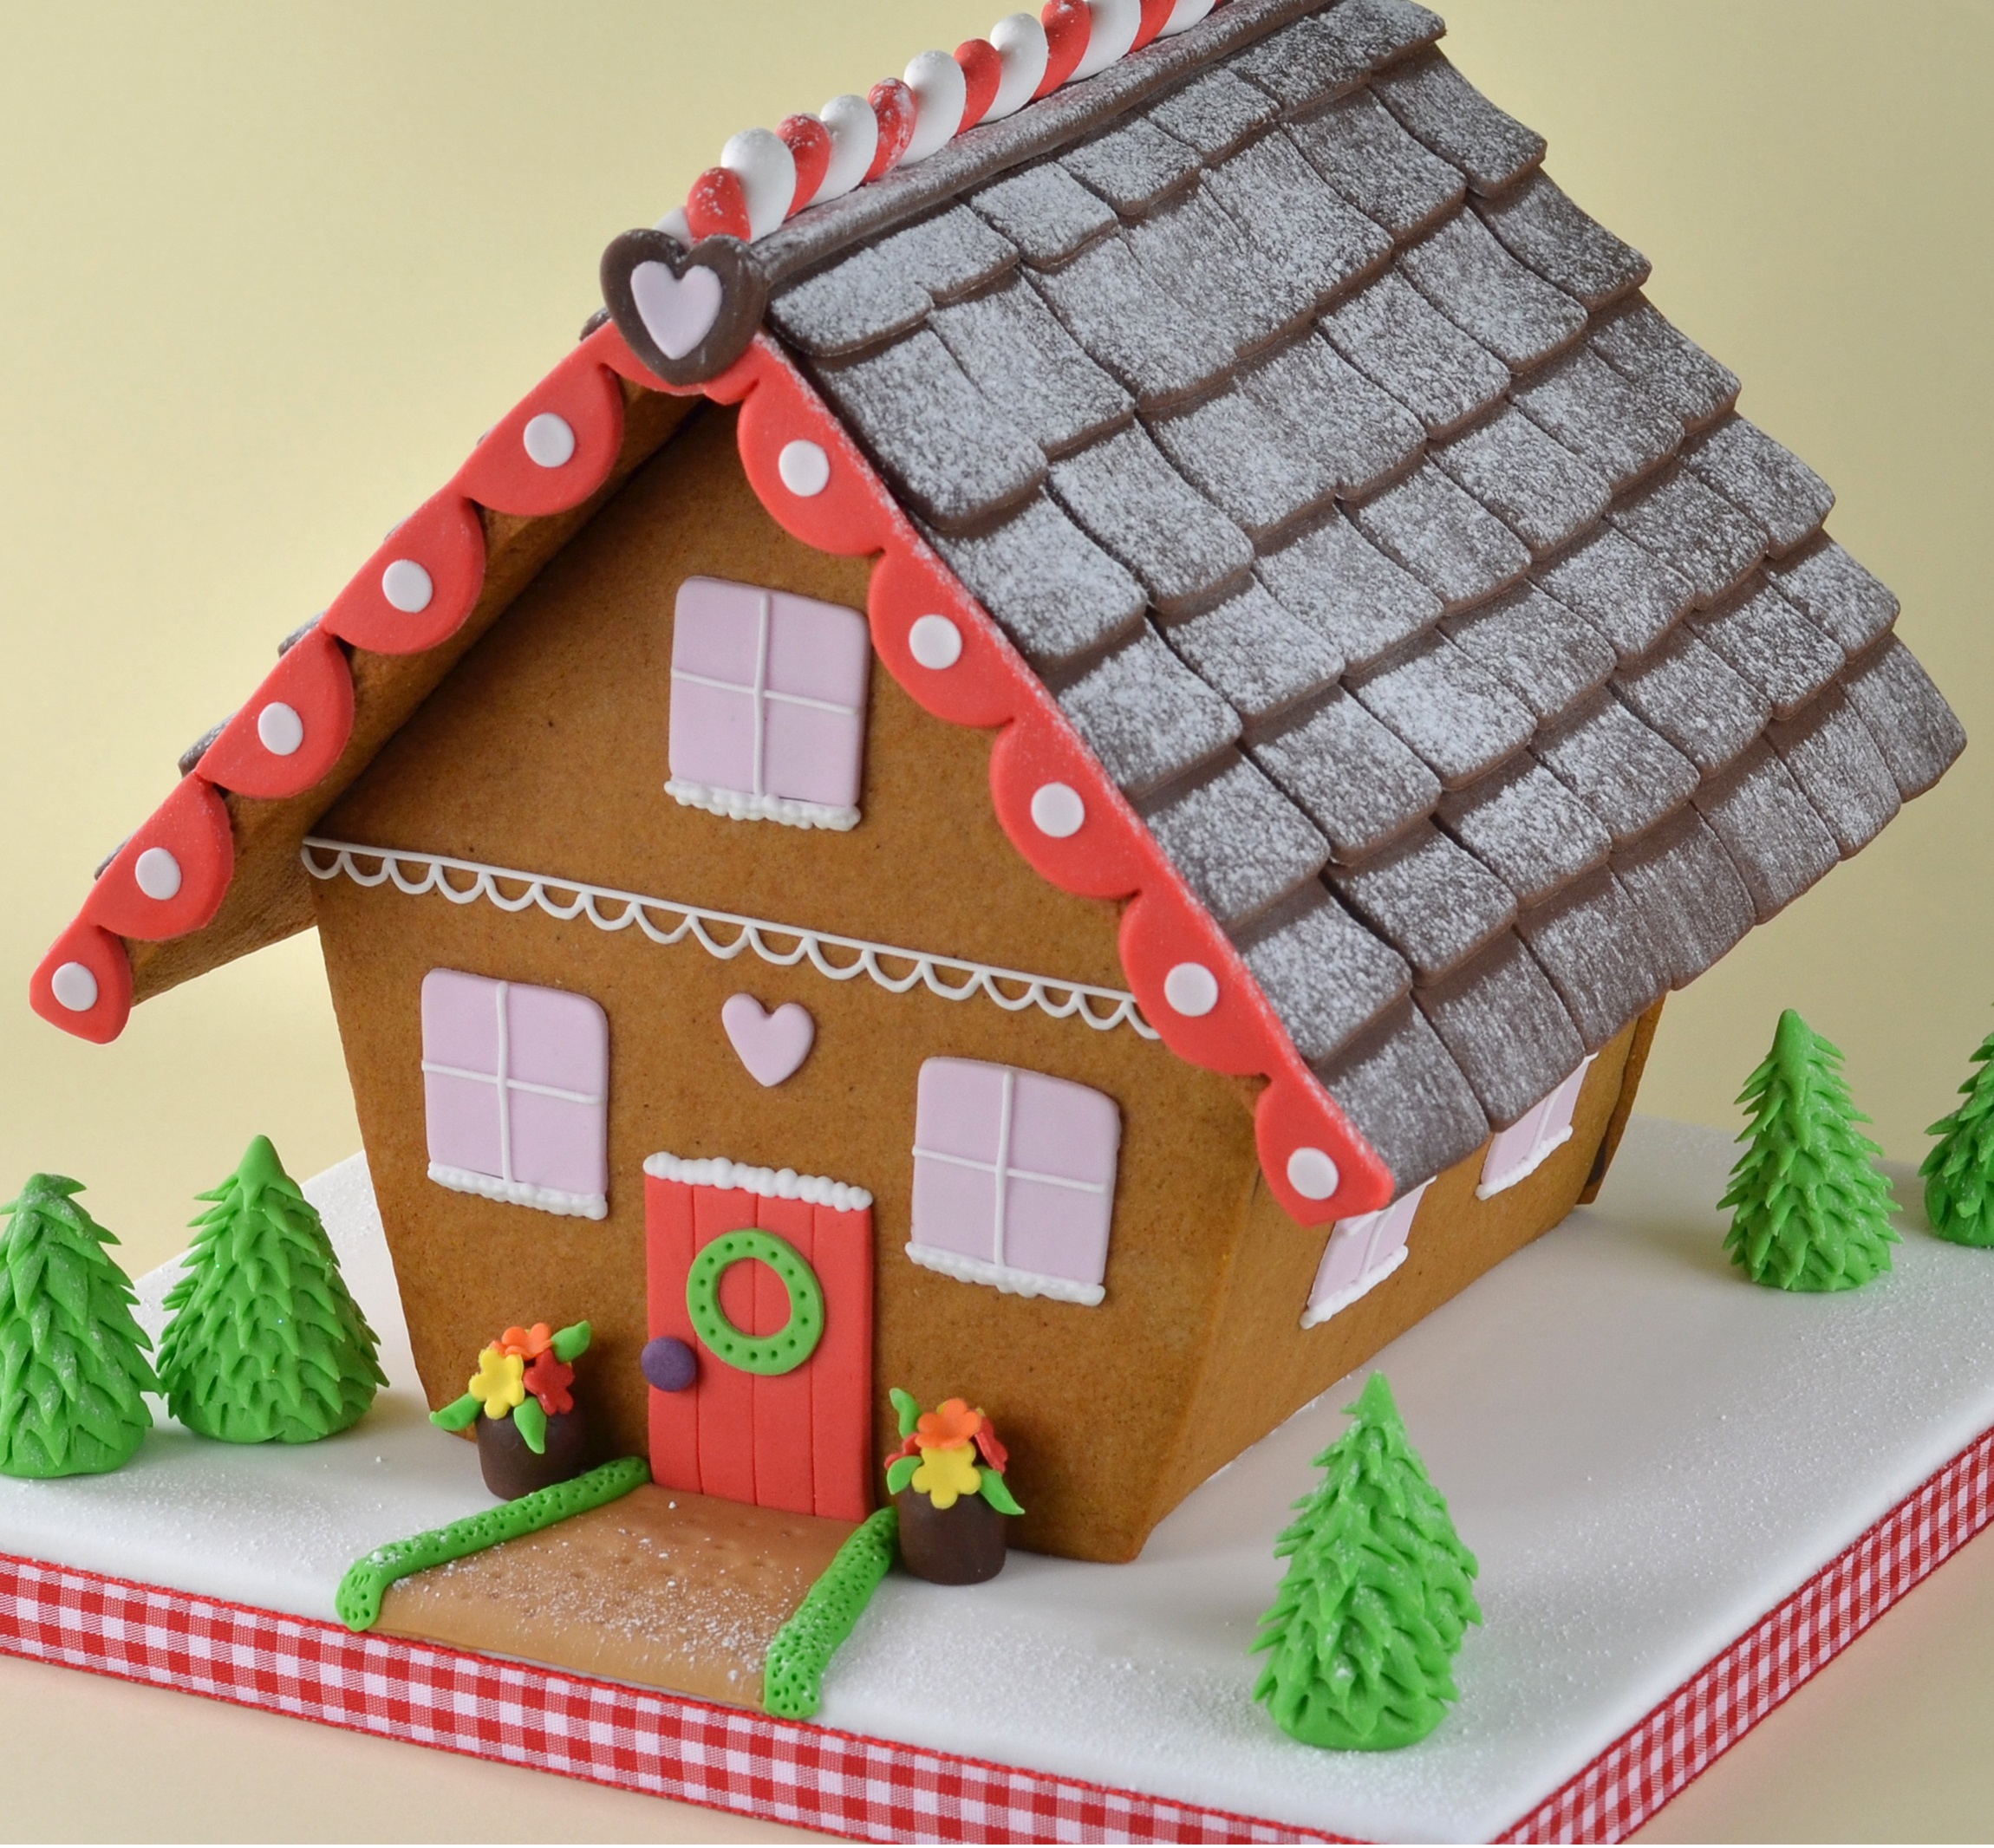 How to make a Gingerbread House